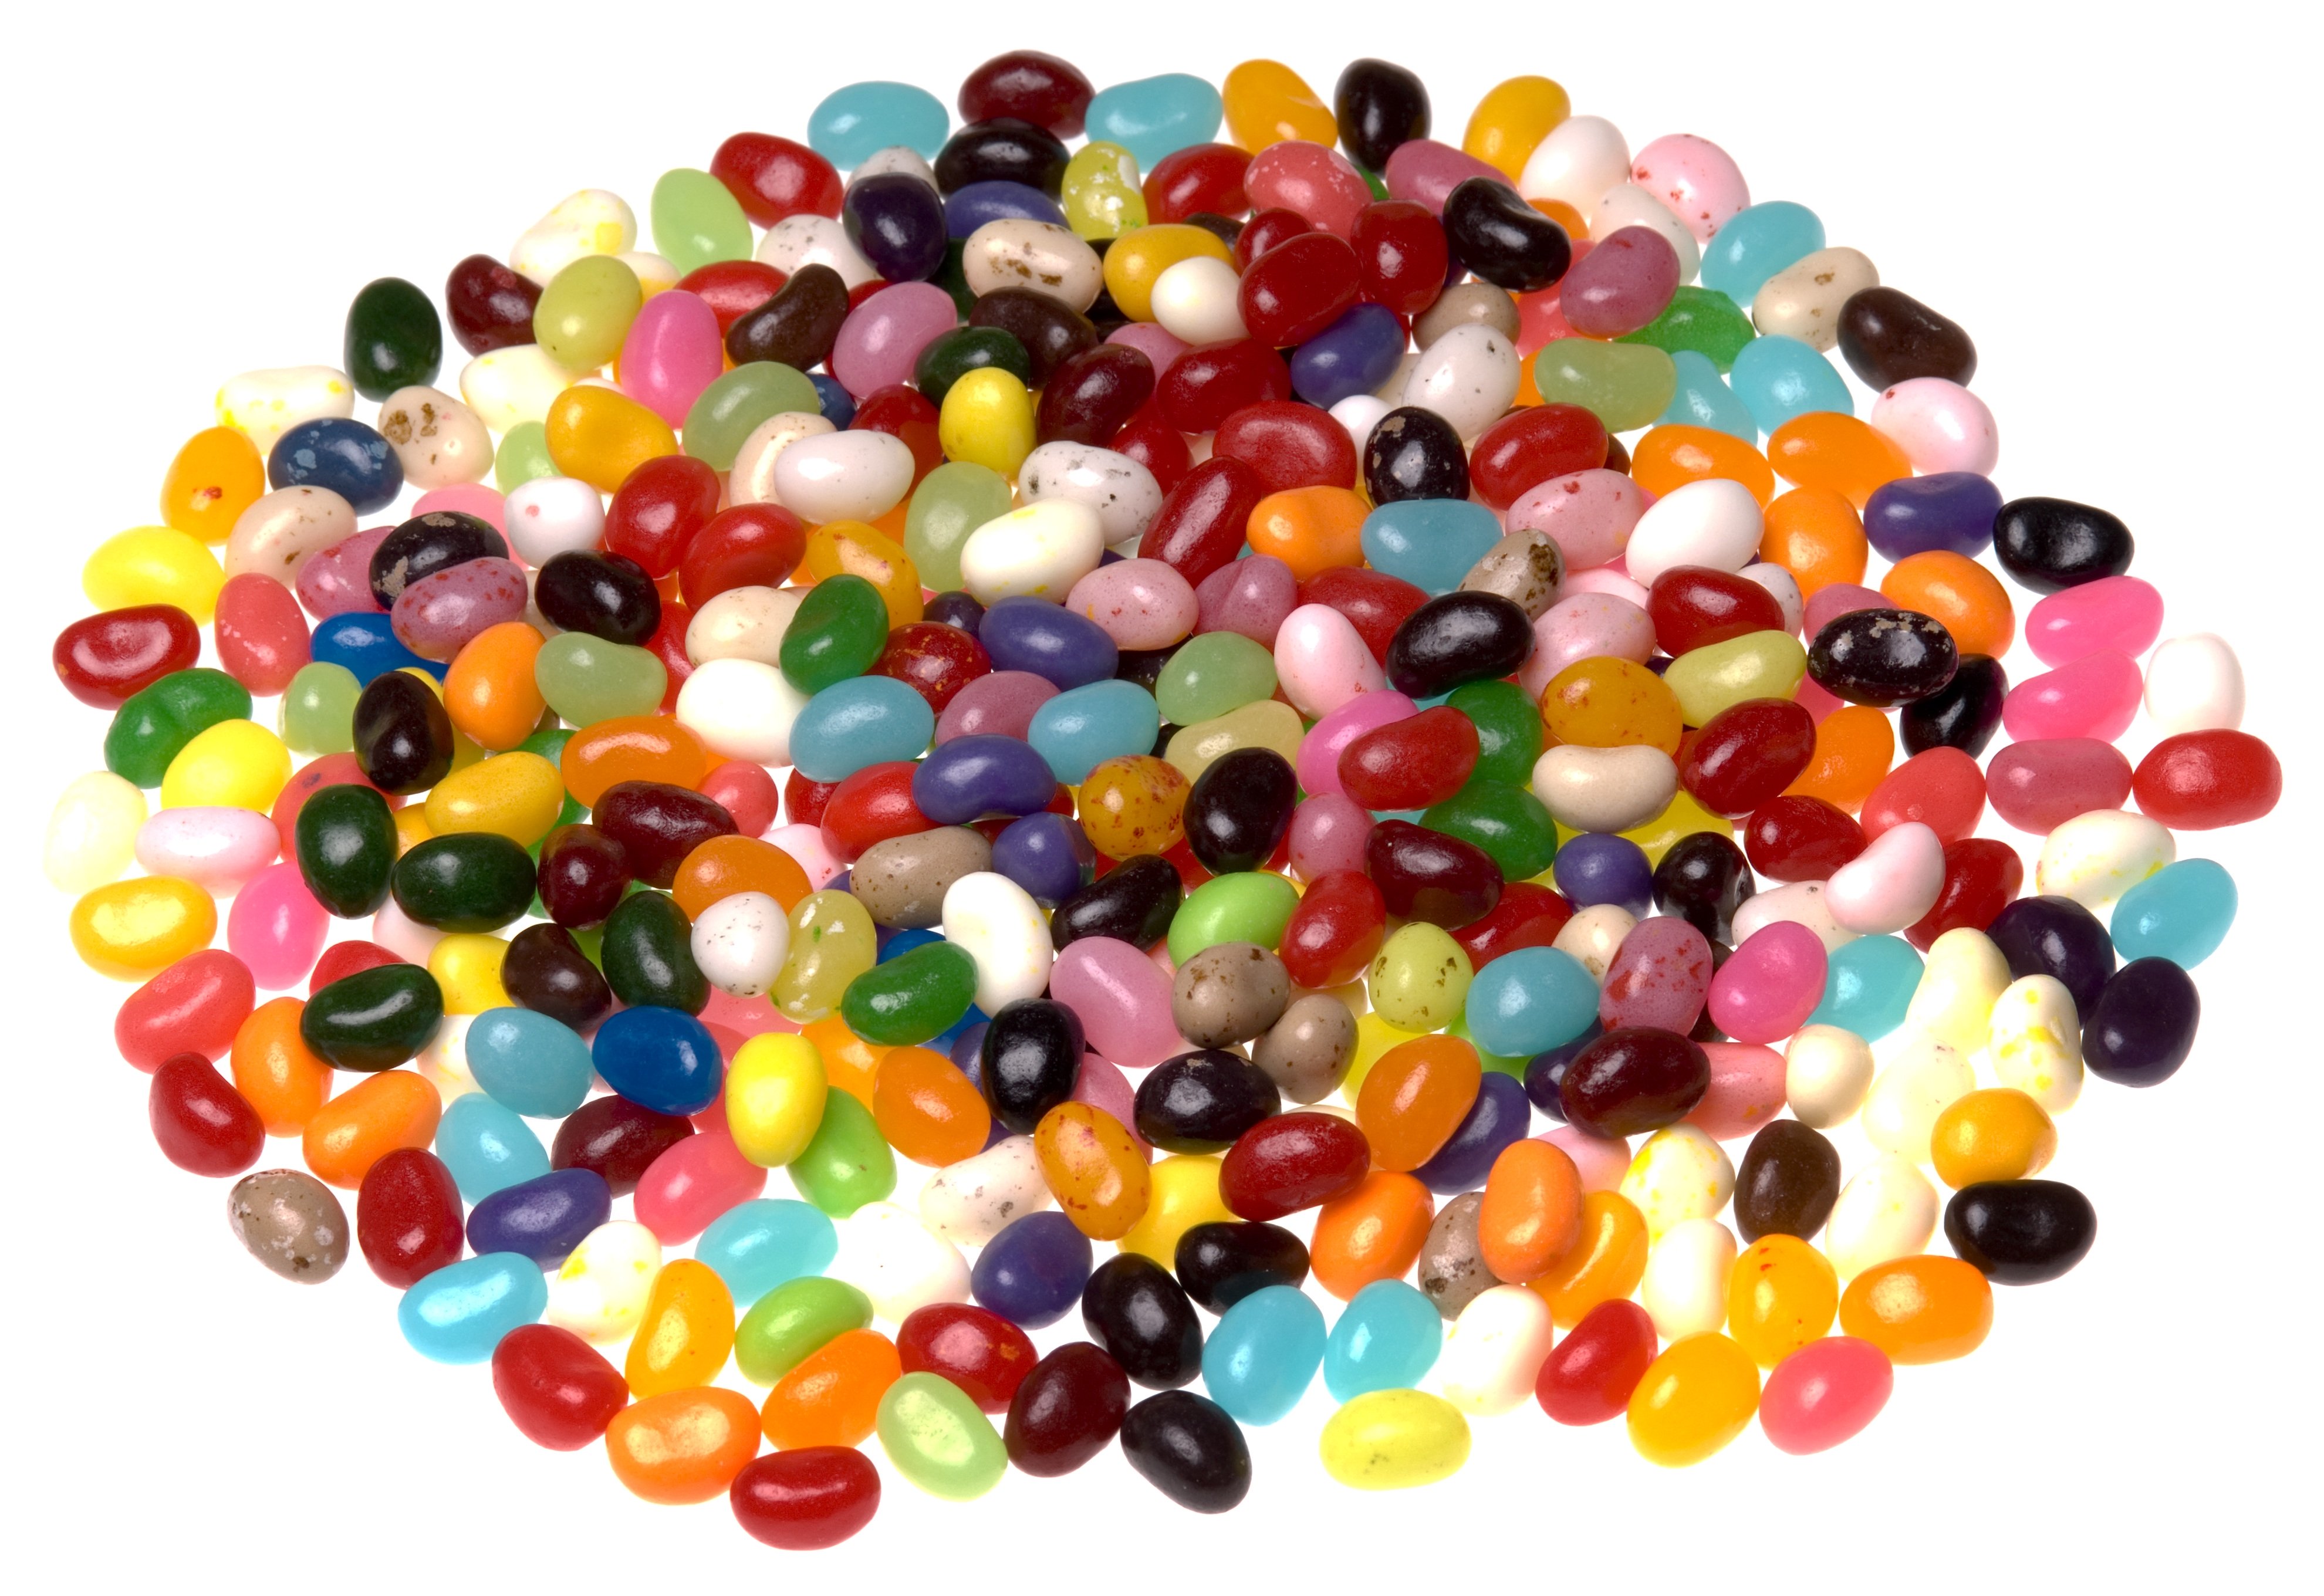 A pile of multi-colored jelly beans.